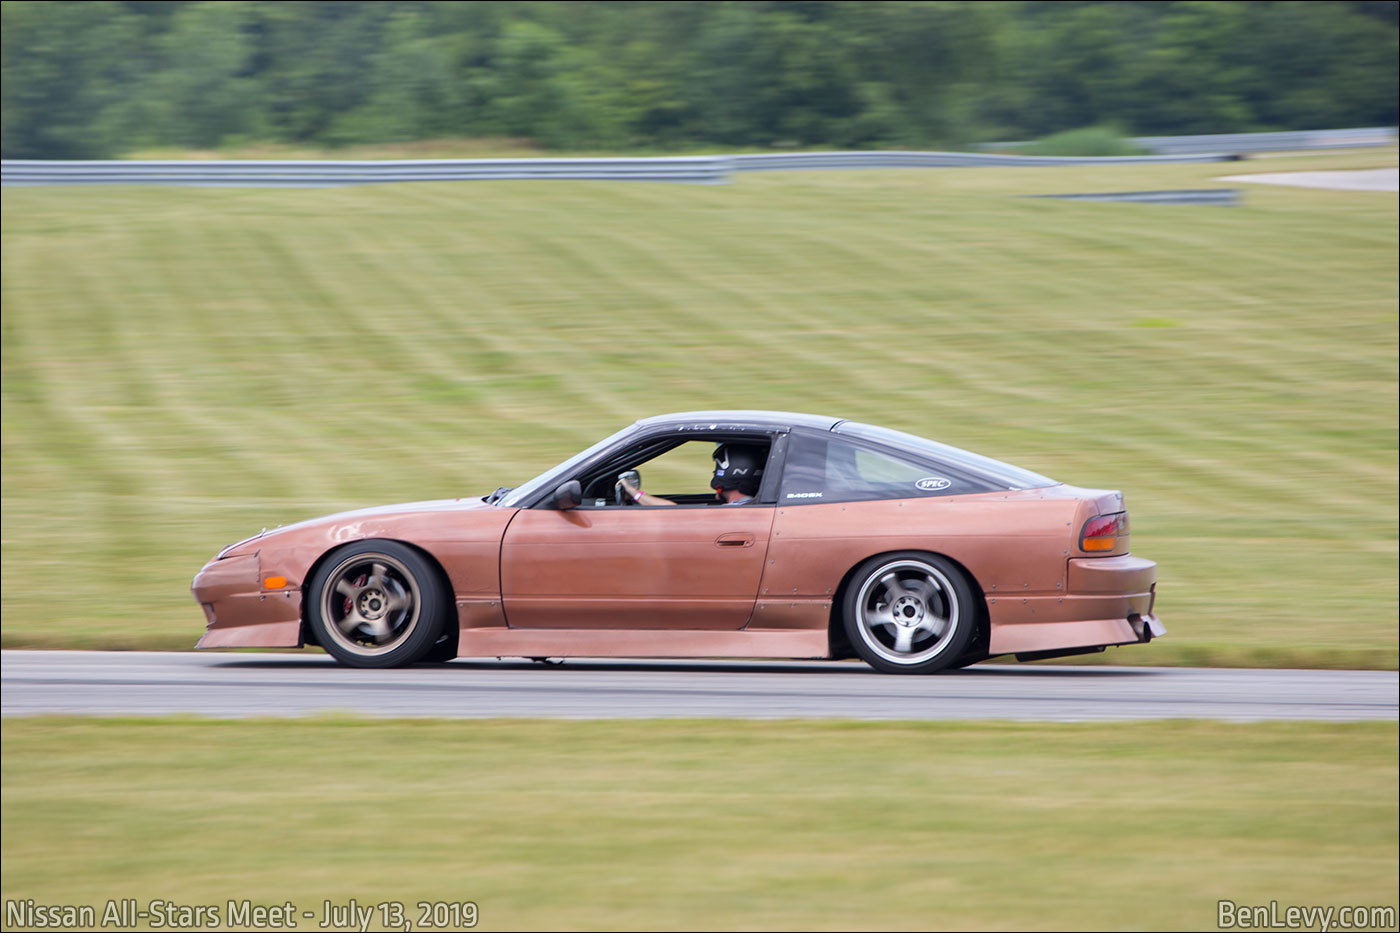 Nissan 240SX on the track